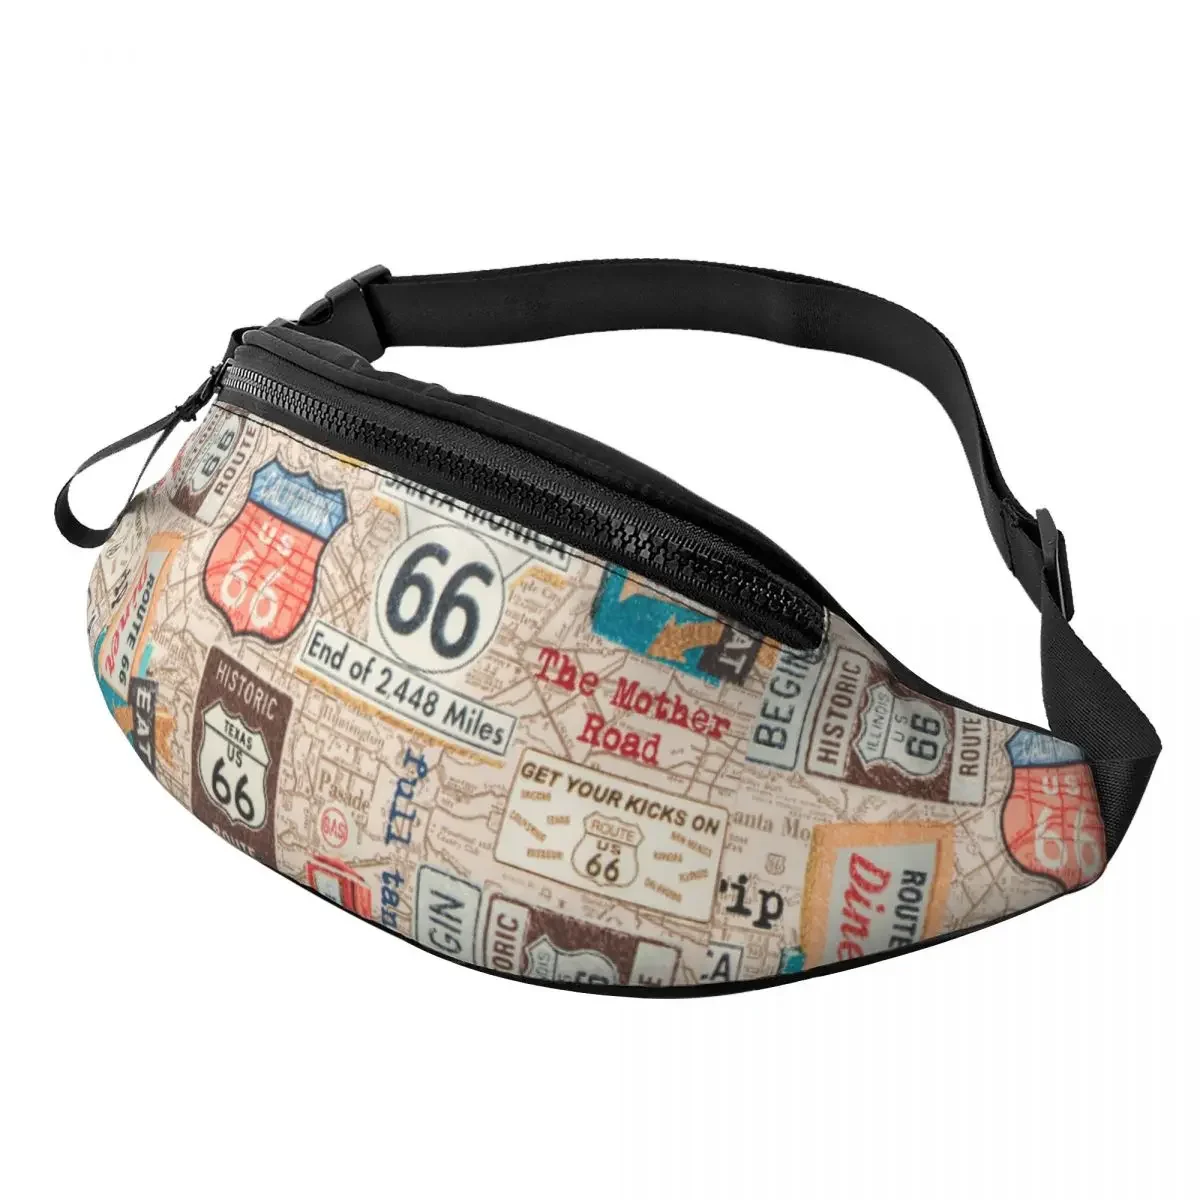 

Customized Vintage Route 66 Map Fanny Pack for Women Men Cool USA Highways Crossbody Waist Bag Traveling Phone Money Pouch